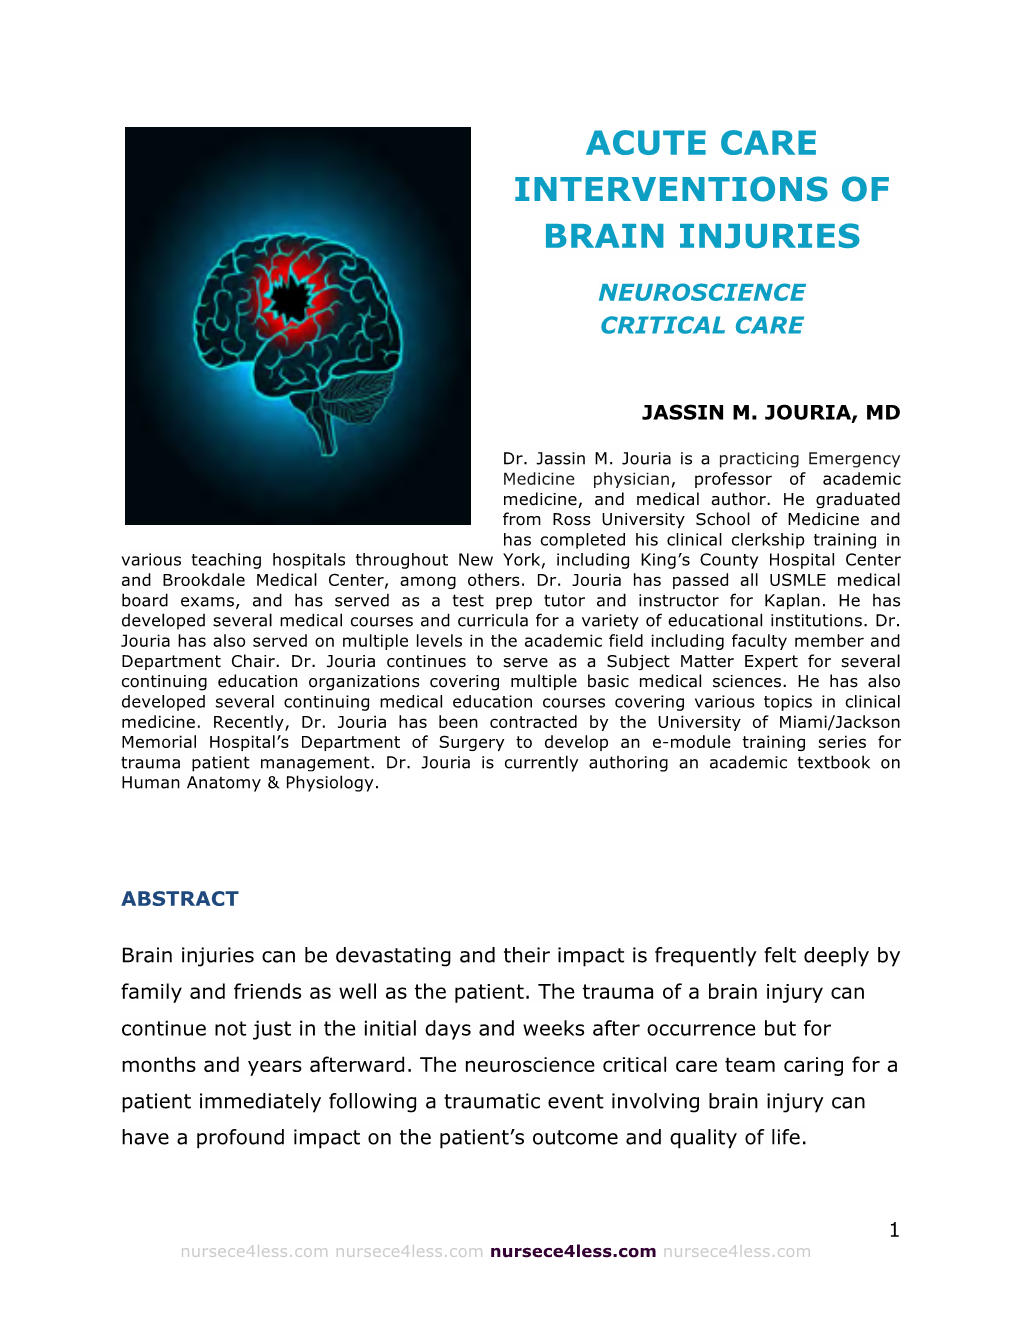 Acute Care Interventions of Brain Injuries